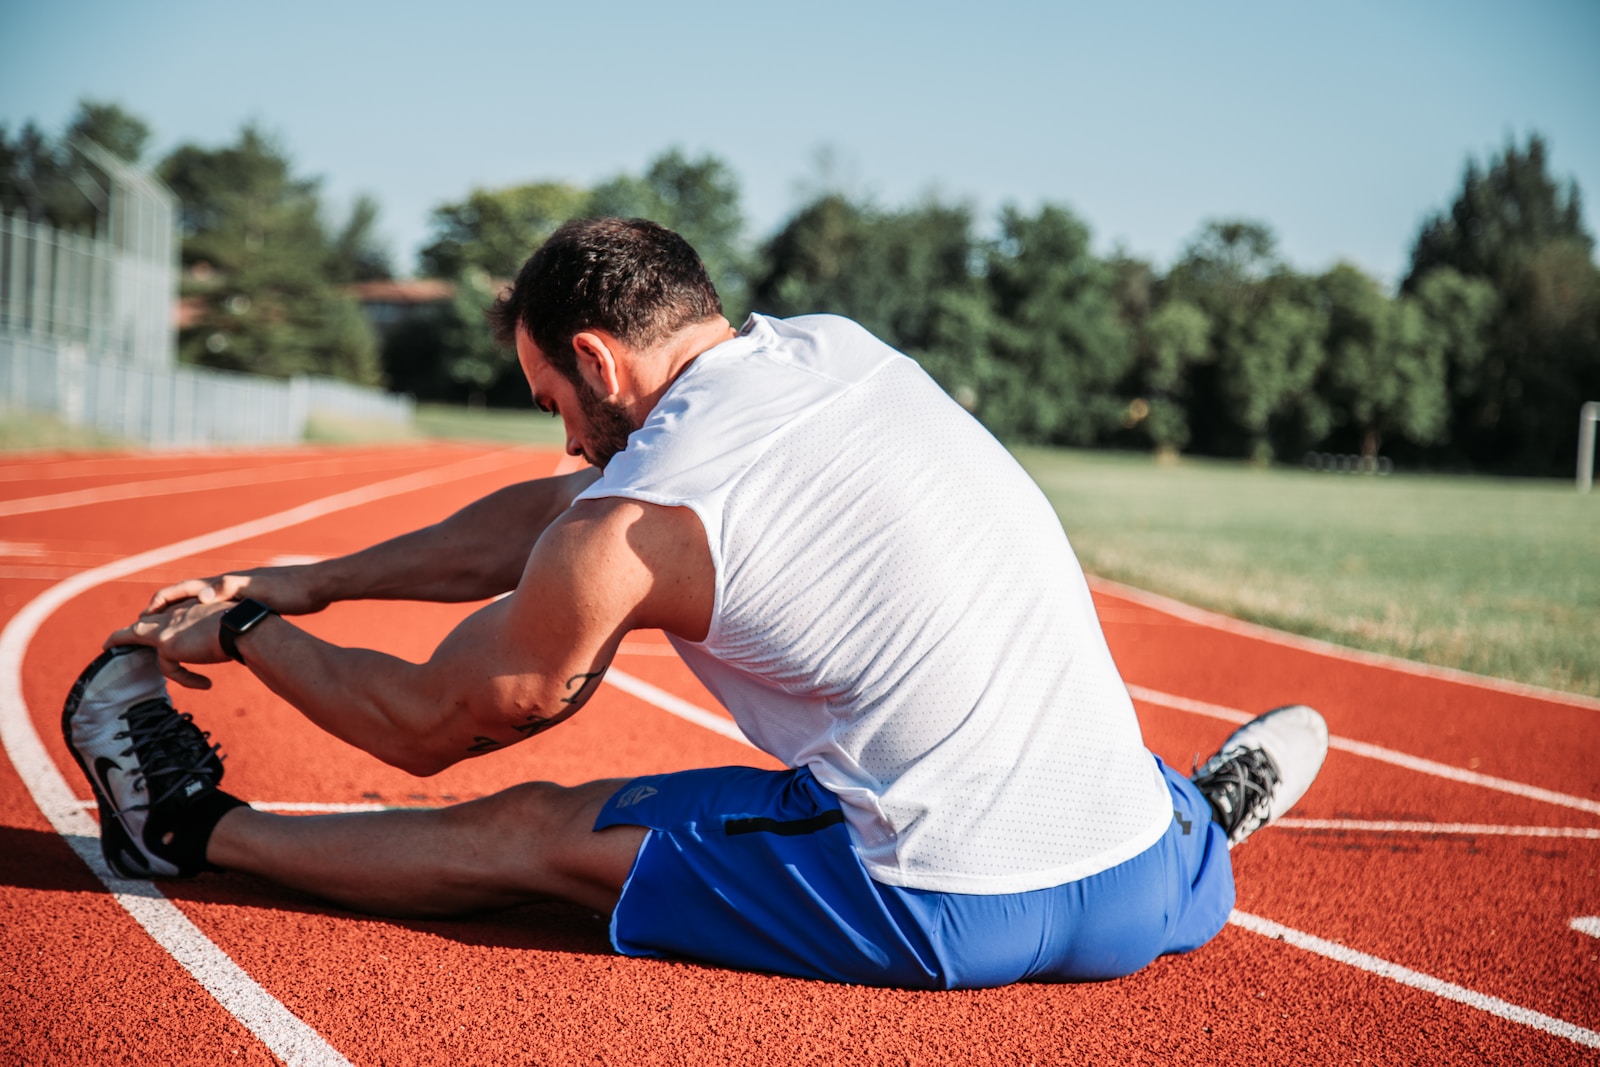 Stretching Improves Athletic Performance and Health